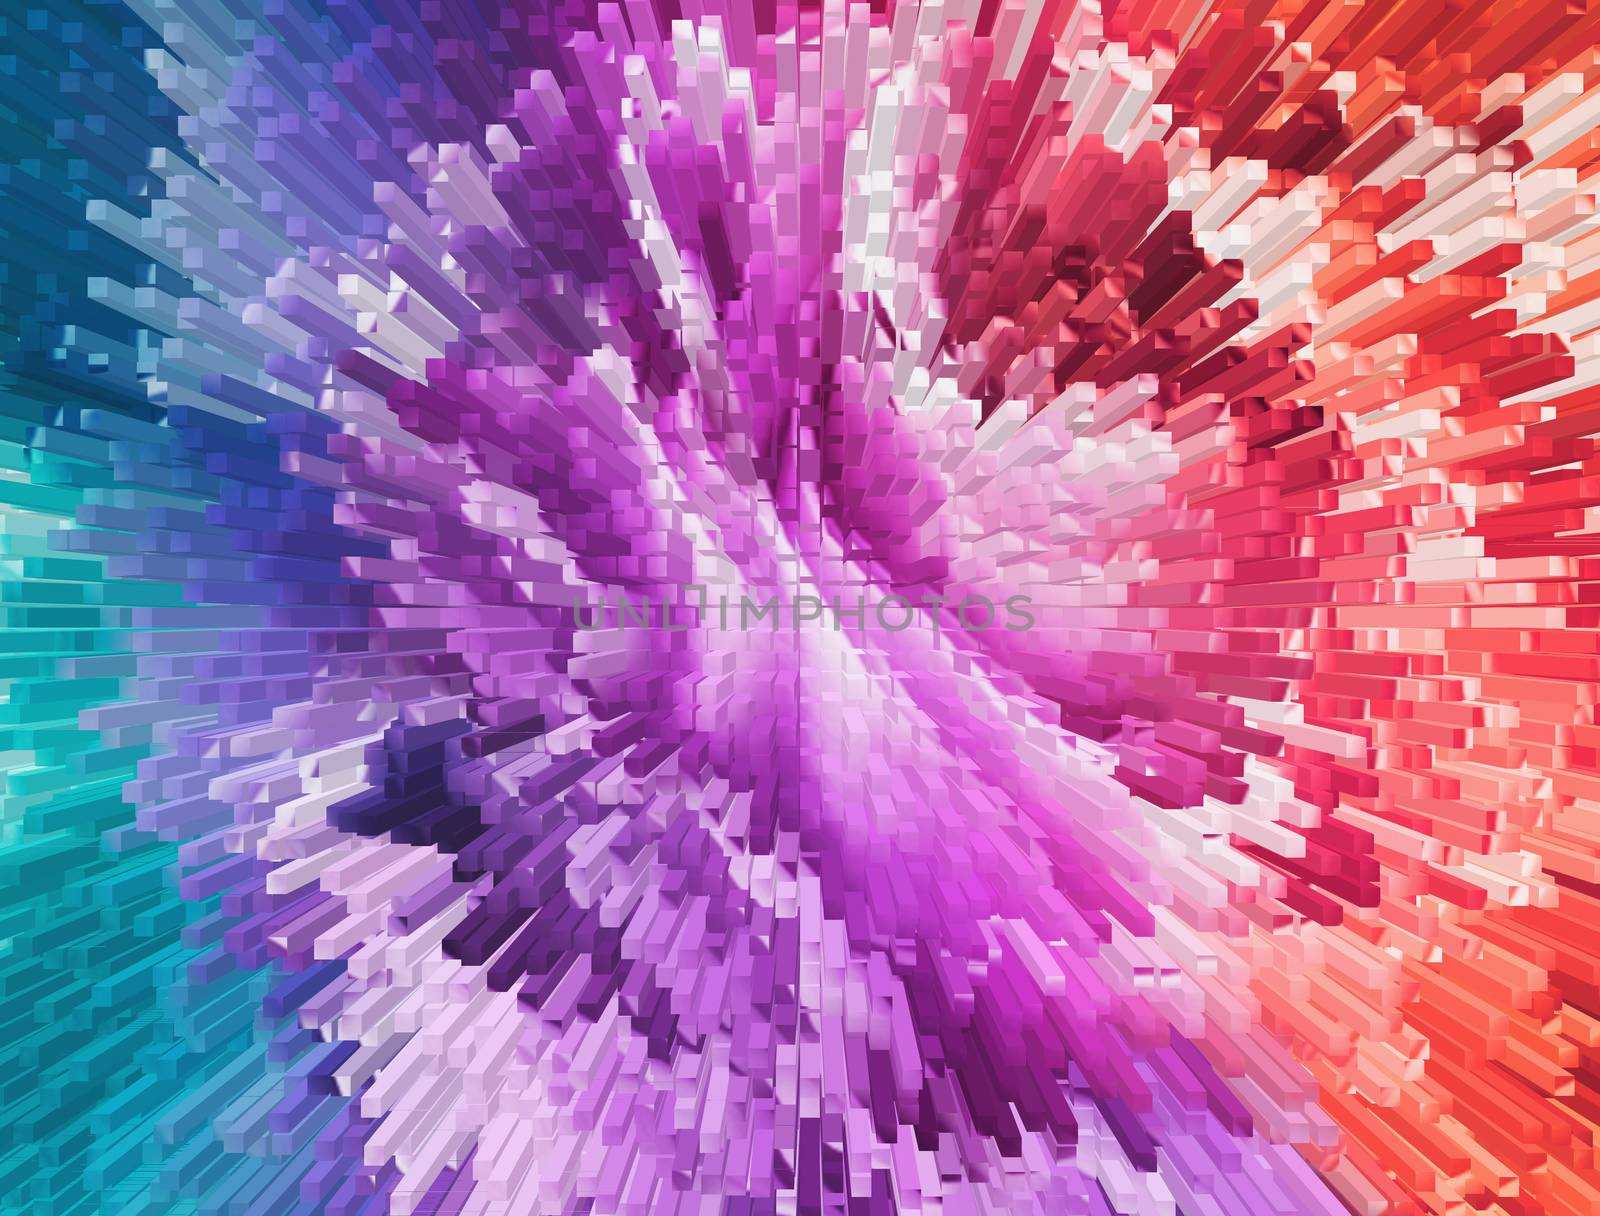 Impressionism painting with extrusion effect, colored floral background, bright colorful abstract, extrusion blocks and pyramids, the gradient for   background and texture, 3D extrusion floral patternrn